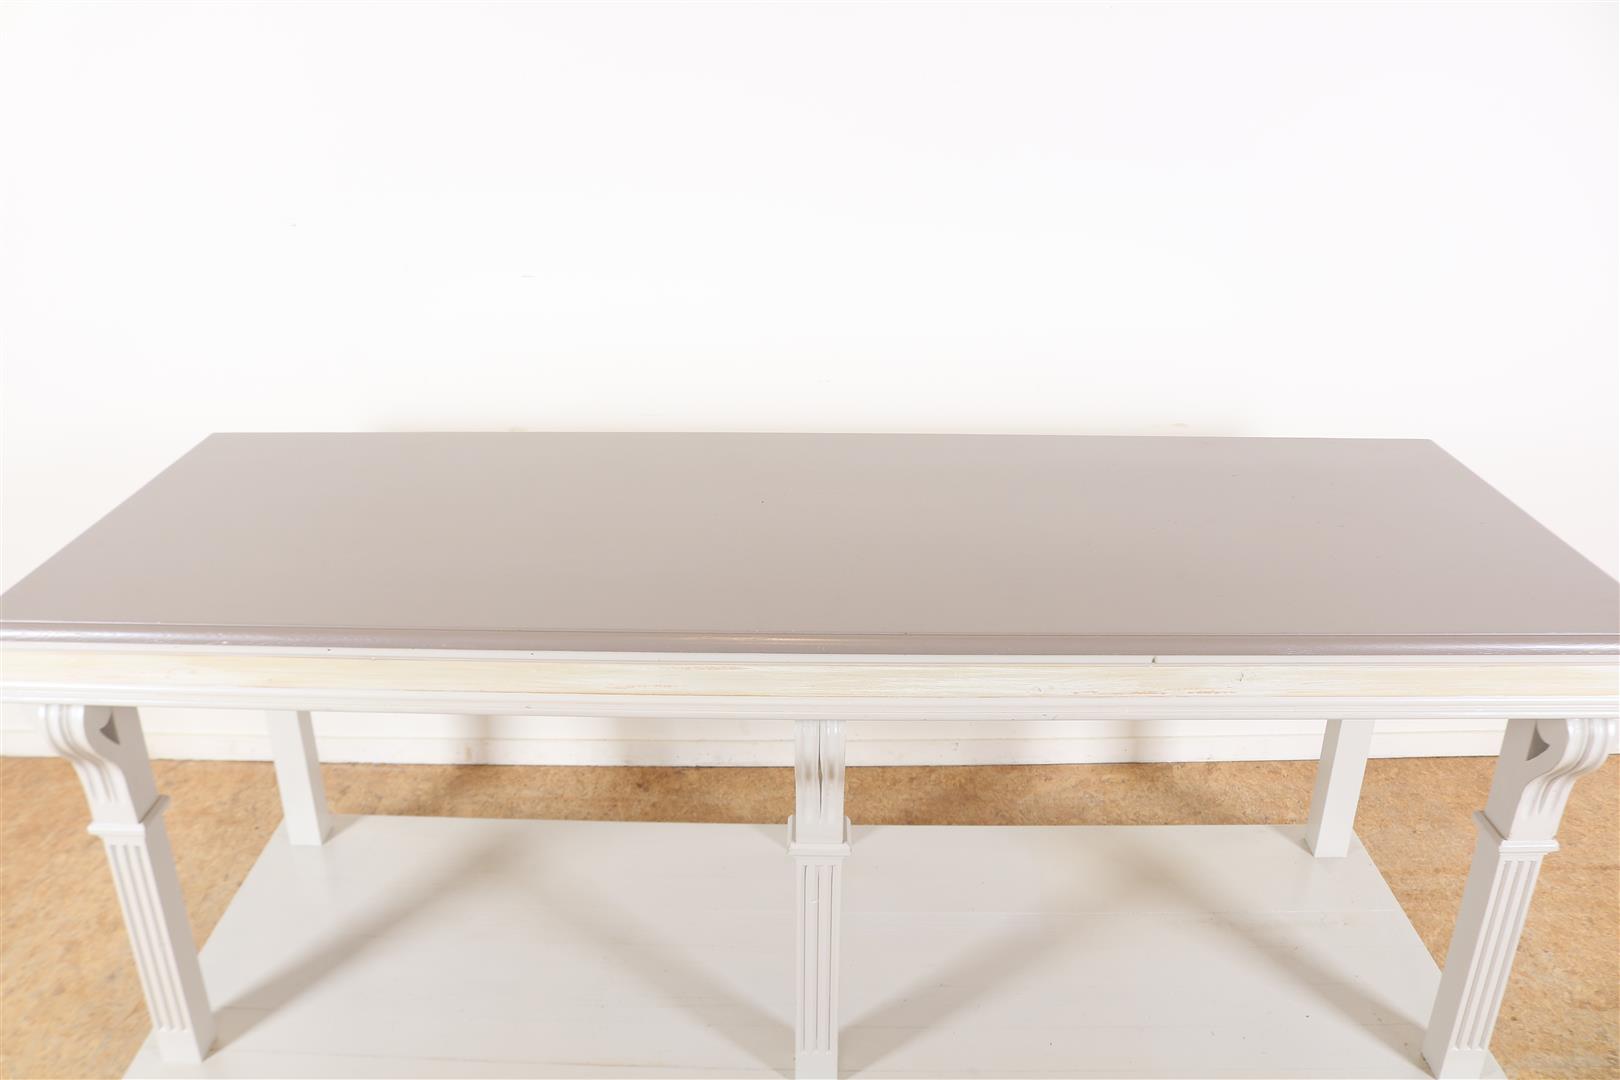 Oak white-painted side table with gray painted top on 6 block legs connected by platform, 82 x 200 x - Image 2 of 5